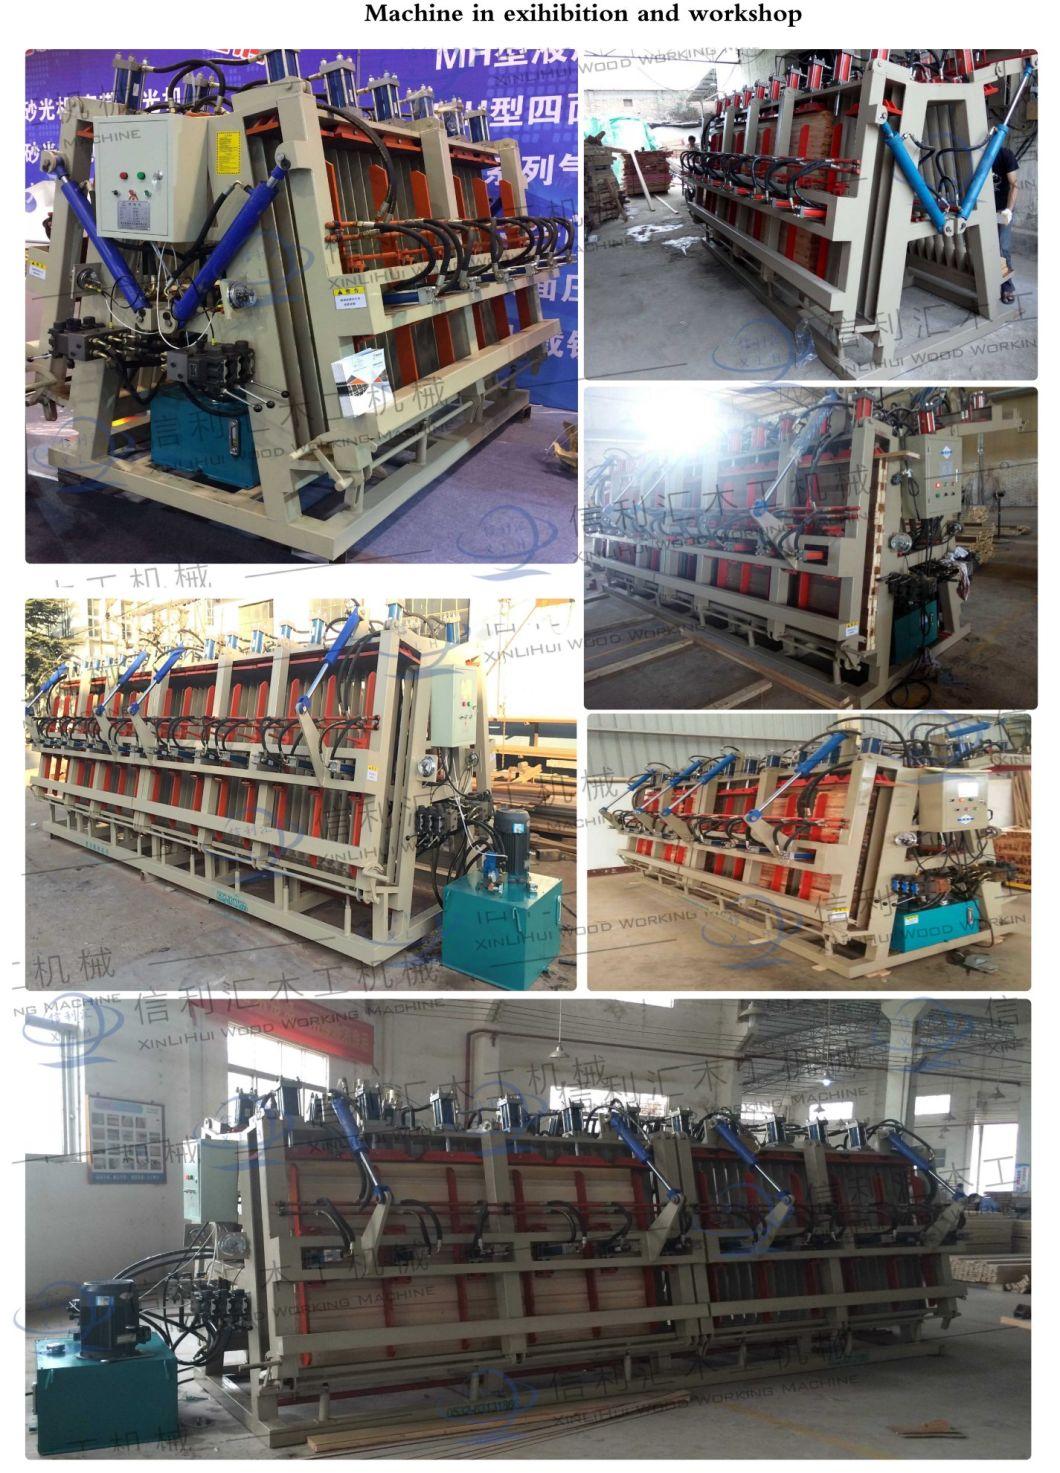 Customized Hipboard Jointing Machine/ Artificial Board Joining Machine with Ce/ Wood Core Veneer Jointer